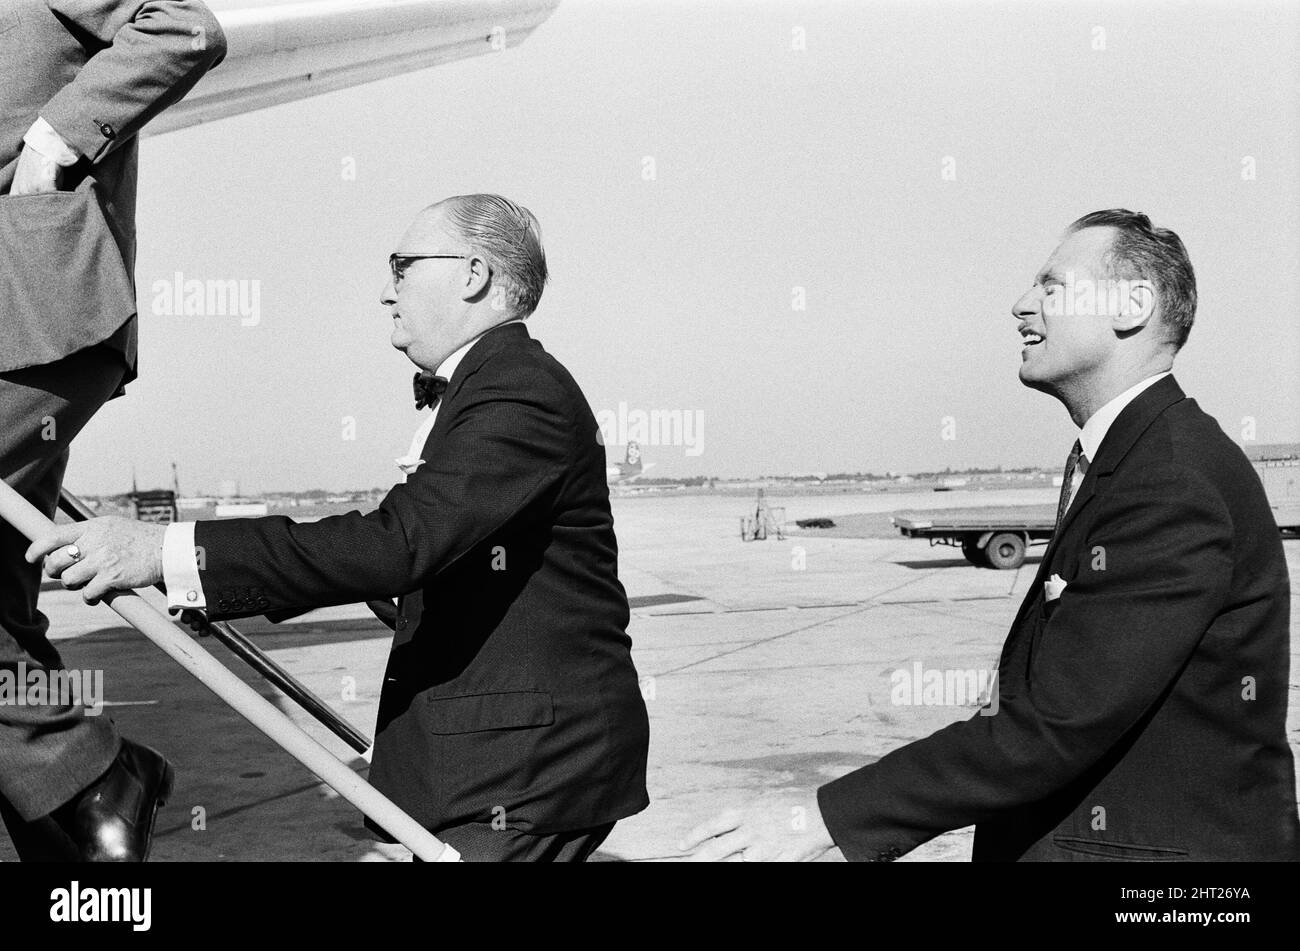 Detective Chief inspector John Hensley (wearing glasses) and Detective Inspector Jack Slipper leave London airport for Glasgow to bring John Duddy back to London. John Duddy was wanted for questioning in connection with the shooting of three London policemen. He later went on to be convicted of murder and possession of firearms and sentenced to life imprisonment. 18th August 1966. Stock Photo